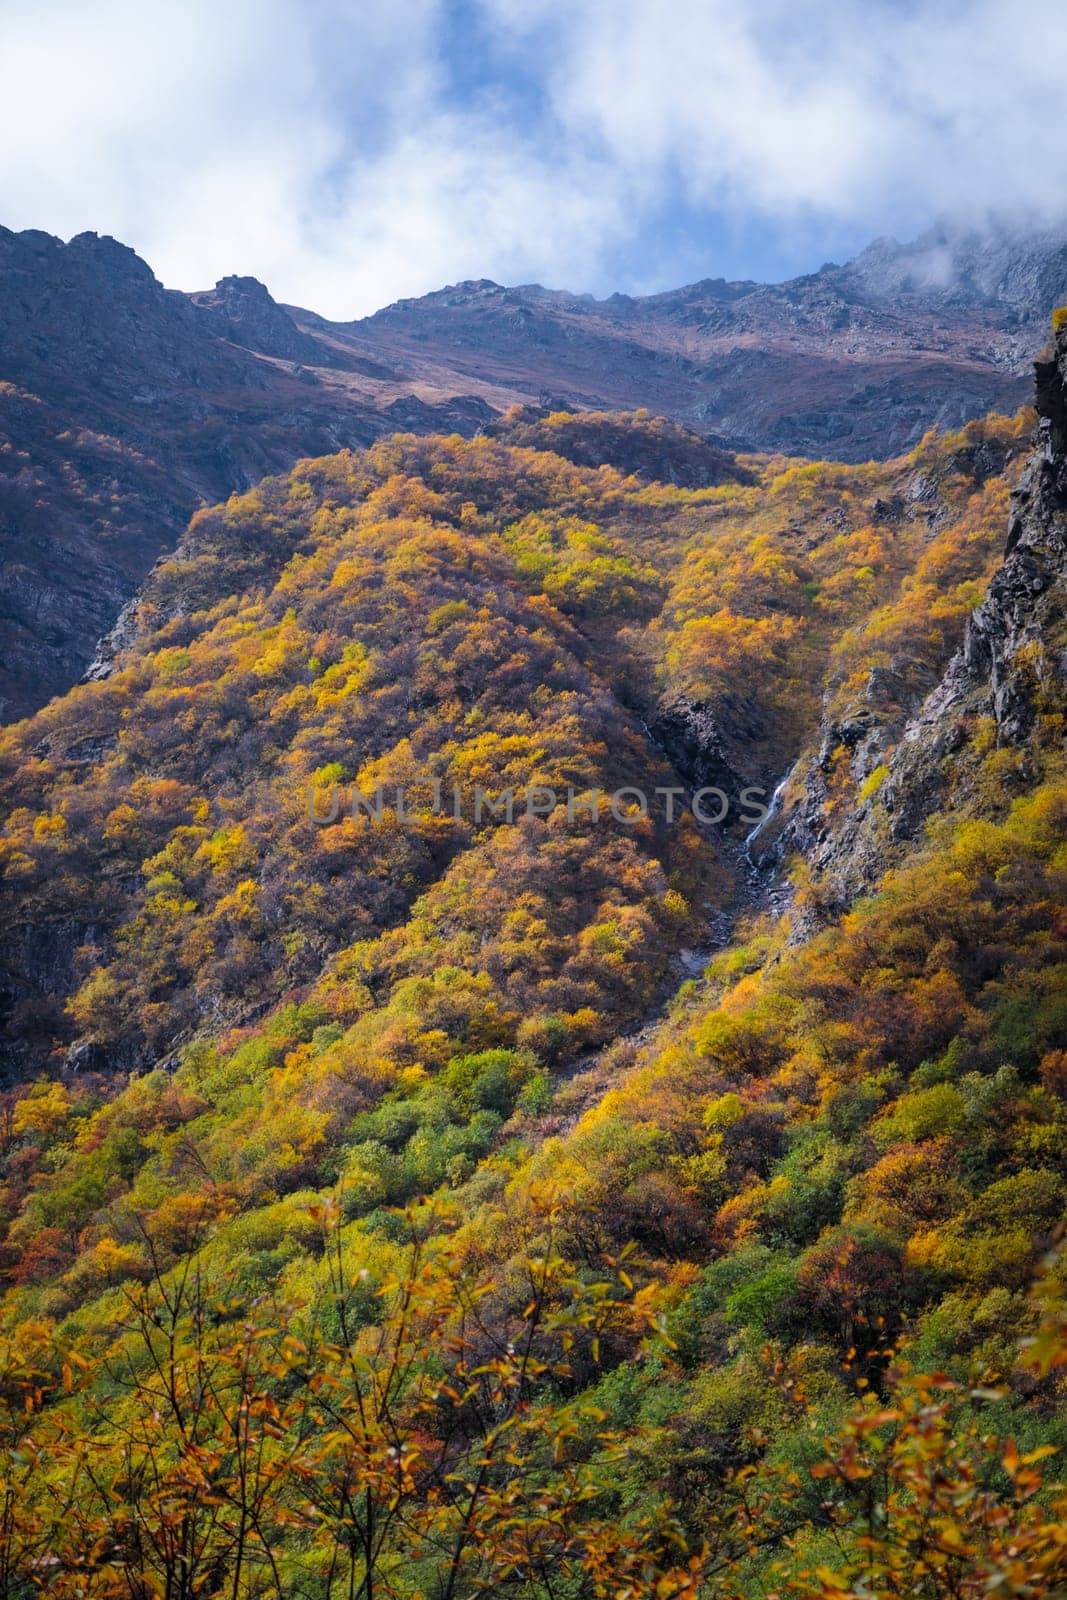 The picturesque autumn colors of the Ural Mountains create an amazing landscape